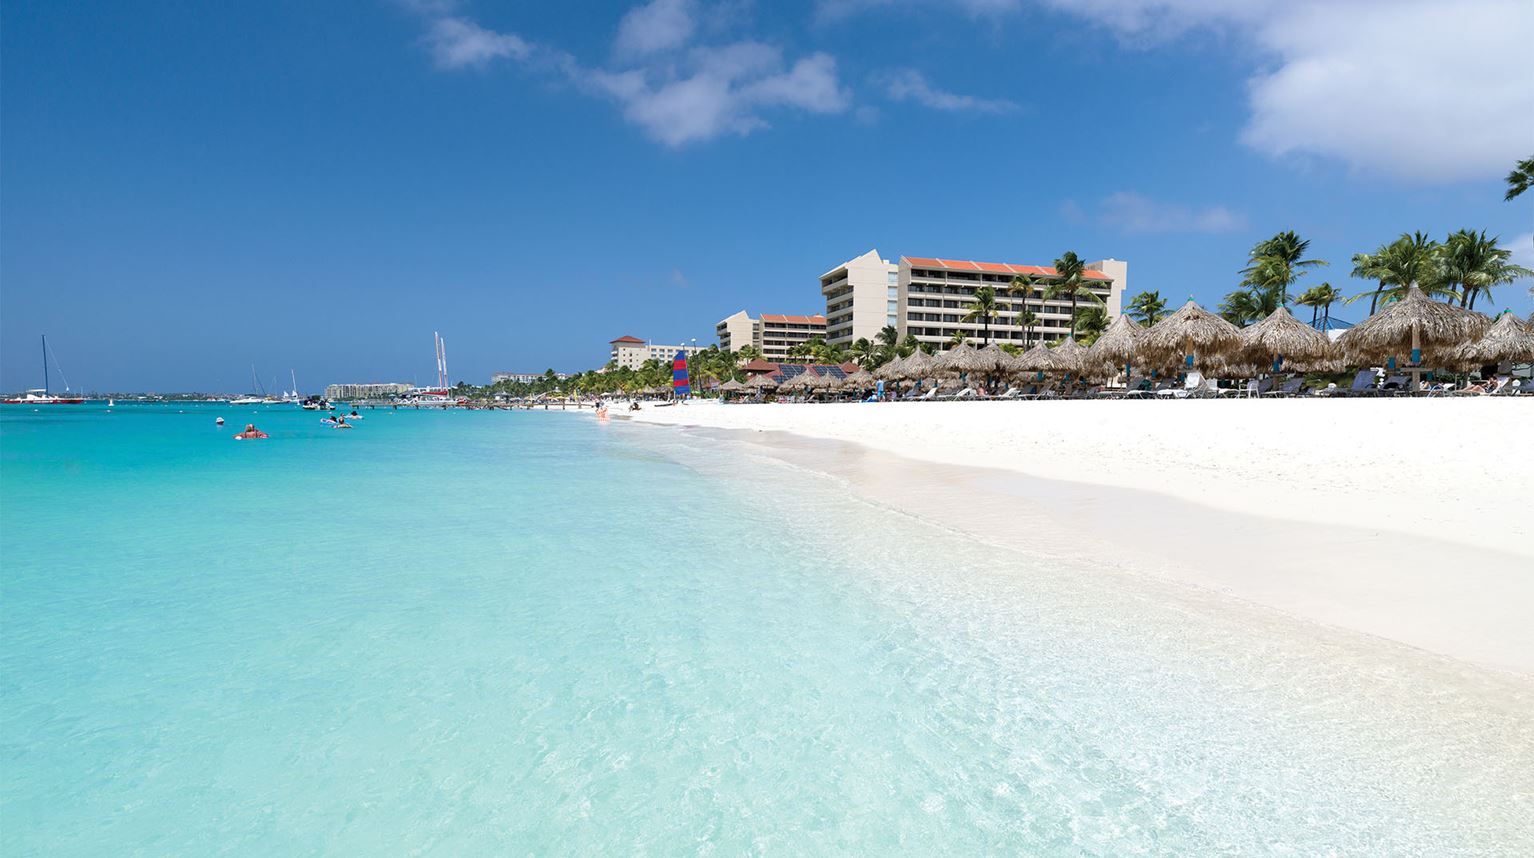 White sandy beach and turquoise water with palm trees and a mid-rise building in the background.